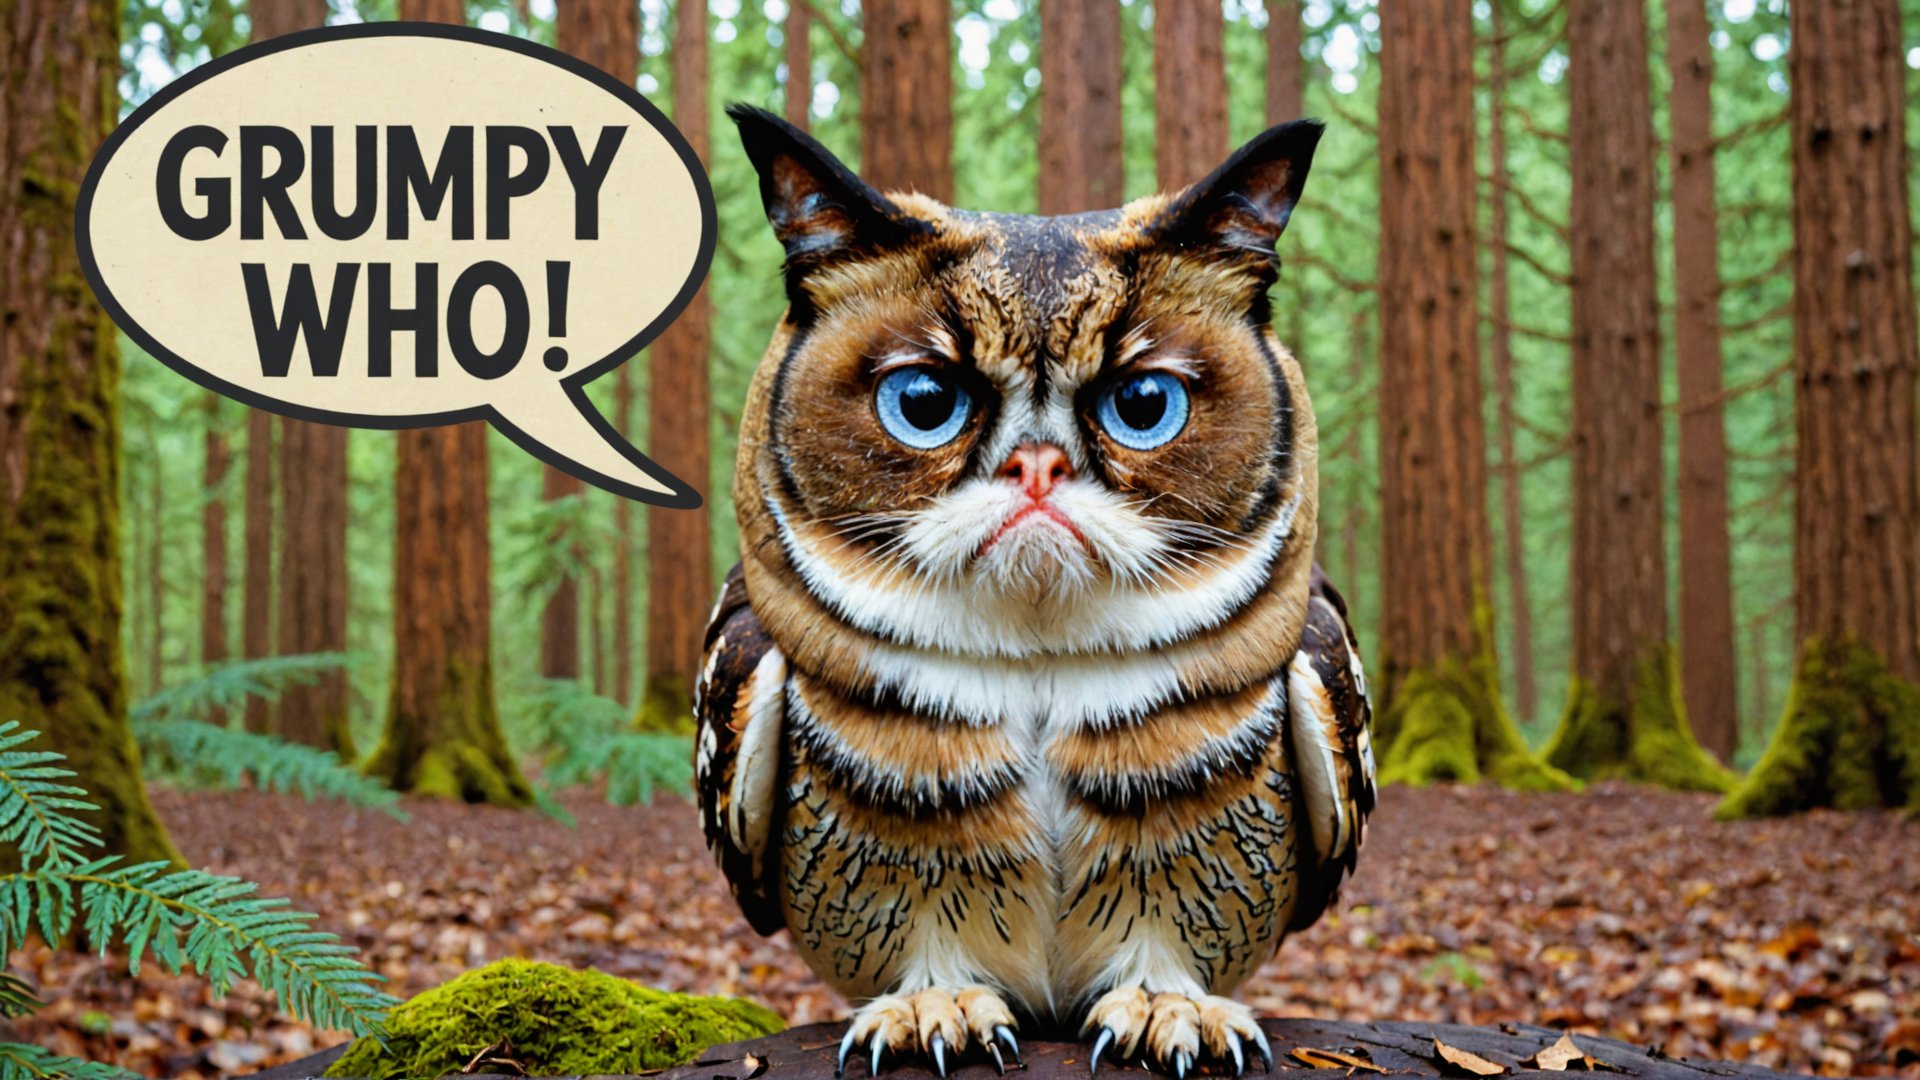 Photo of owl grumpy cat in forest with a text bubble that says "grumpy who"